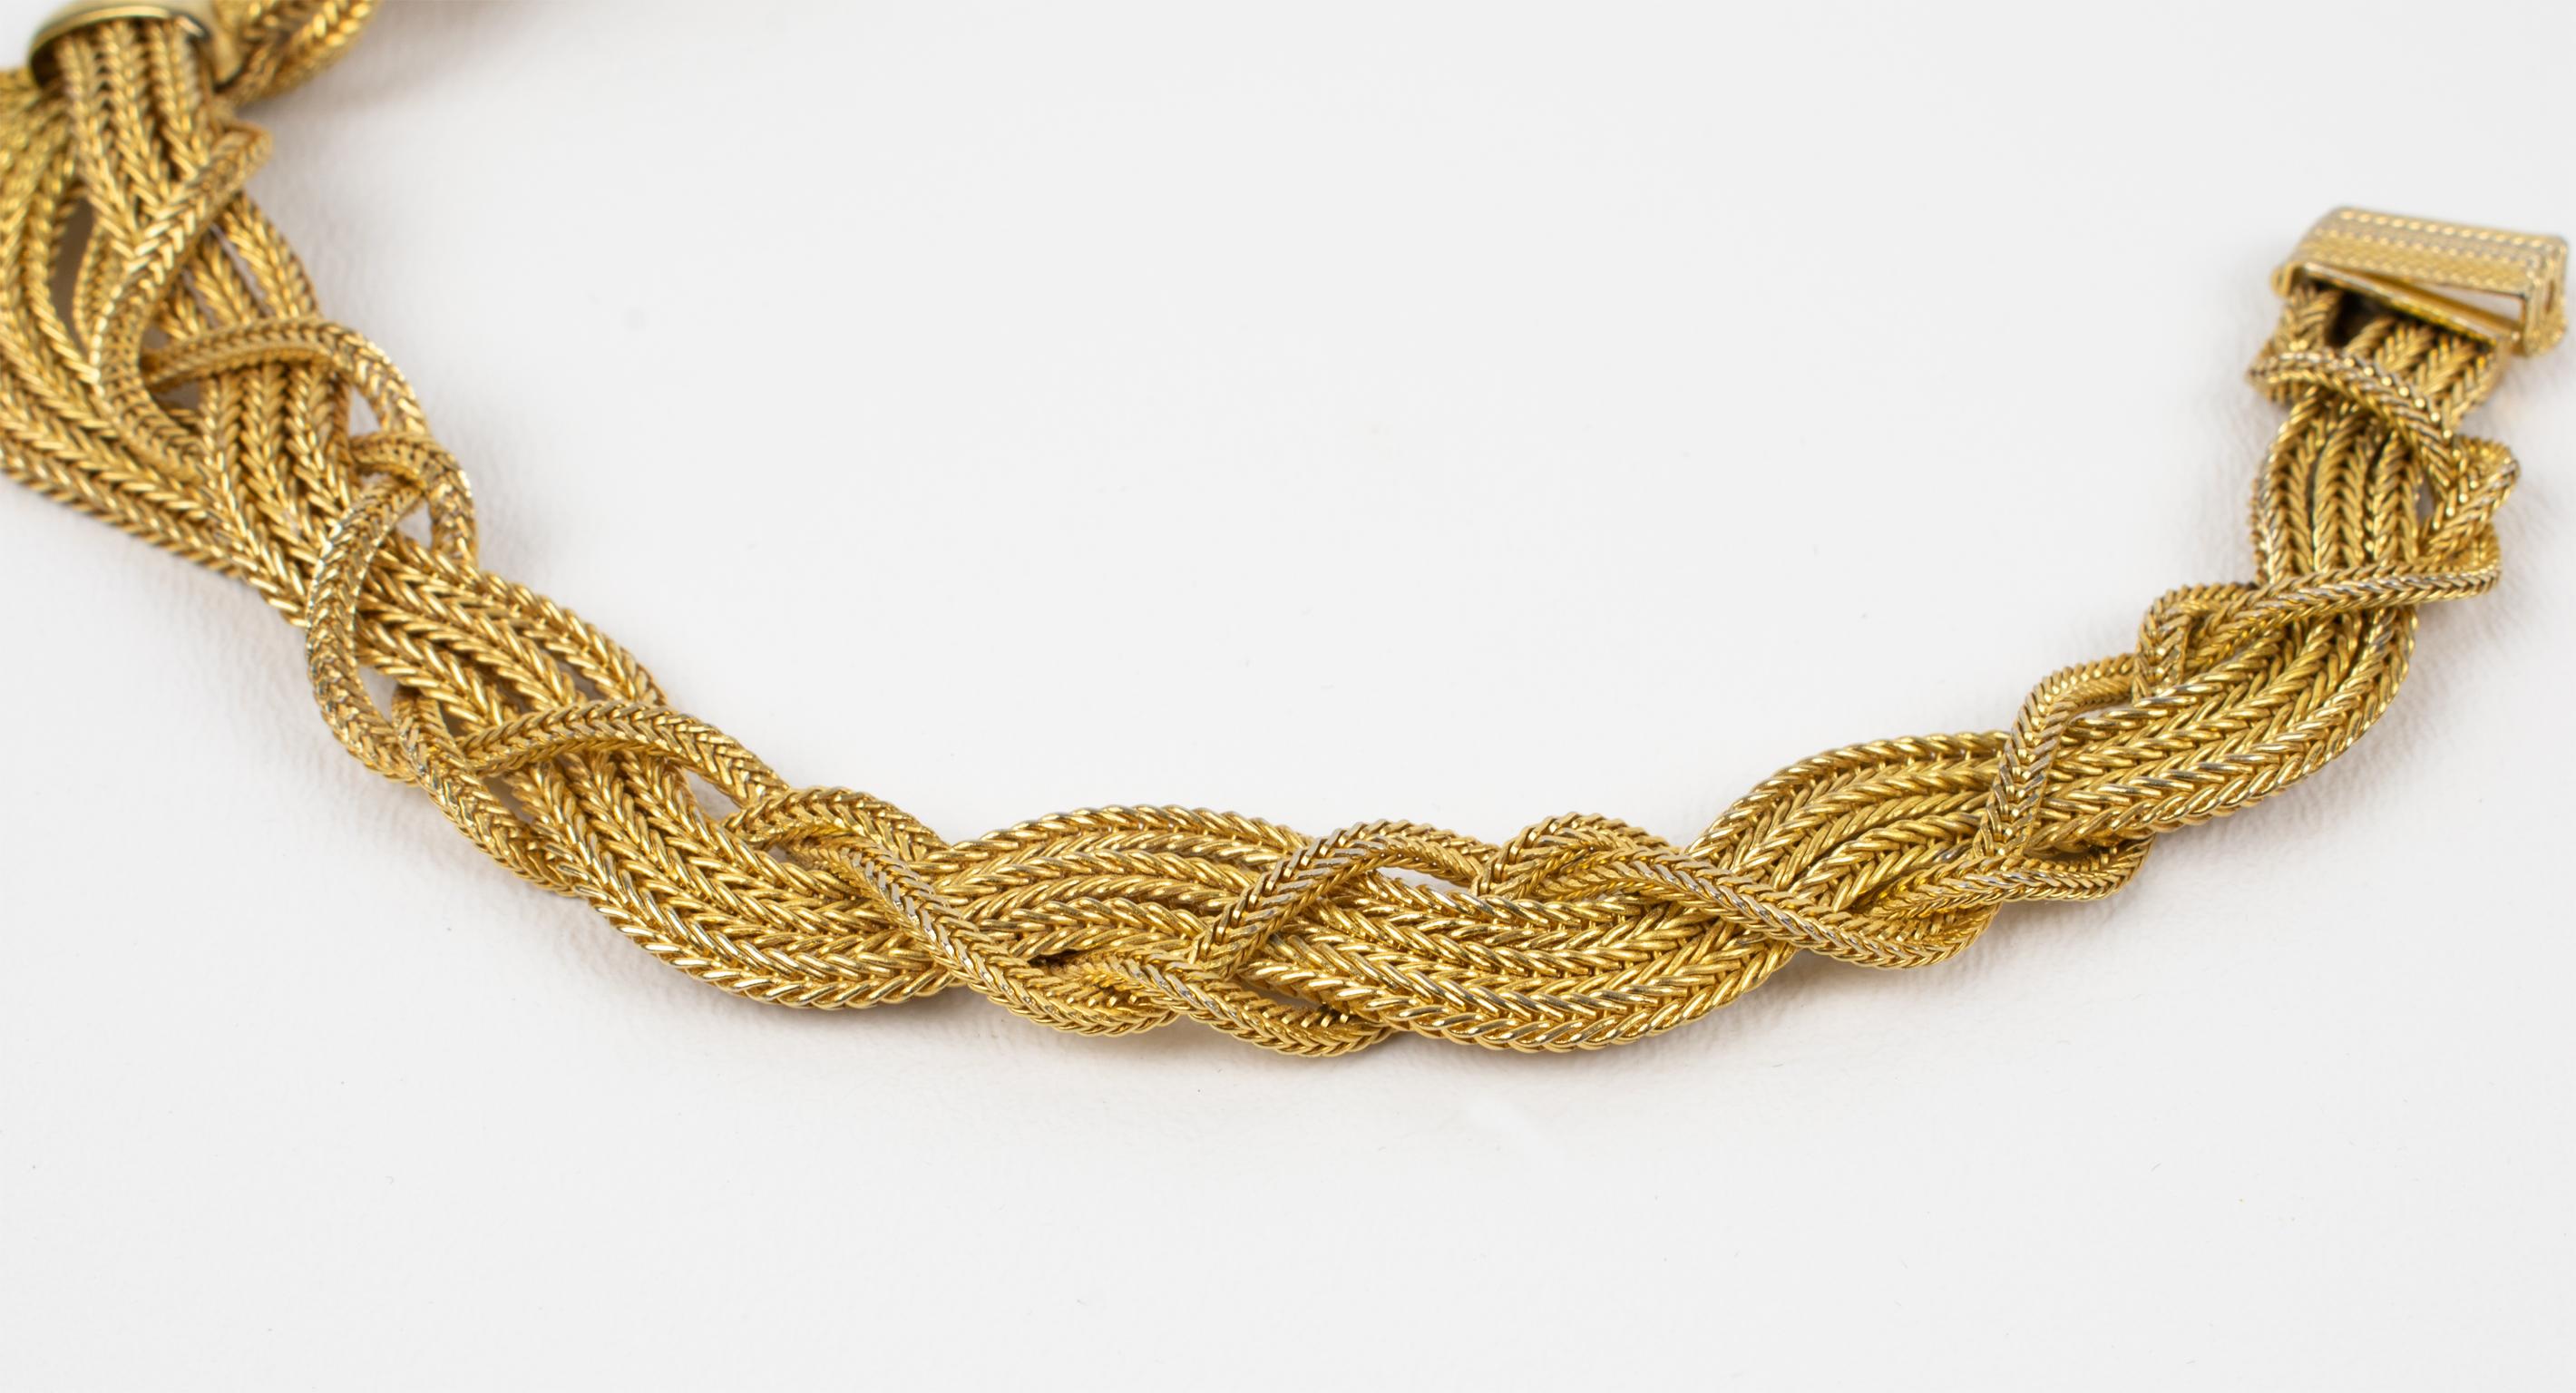 Christian Dior by Grosse 1958 Gilded Metal Braided Choker Necklace For Sale 5